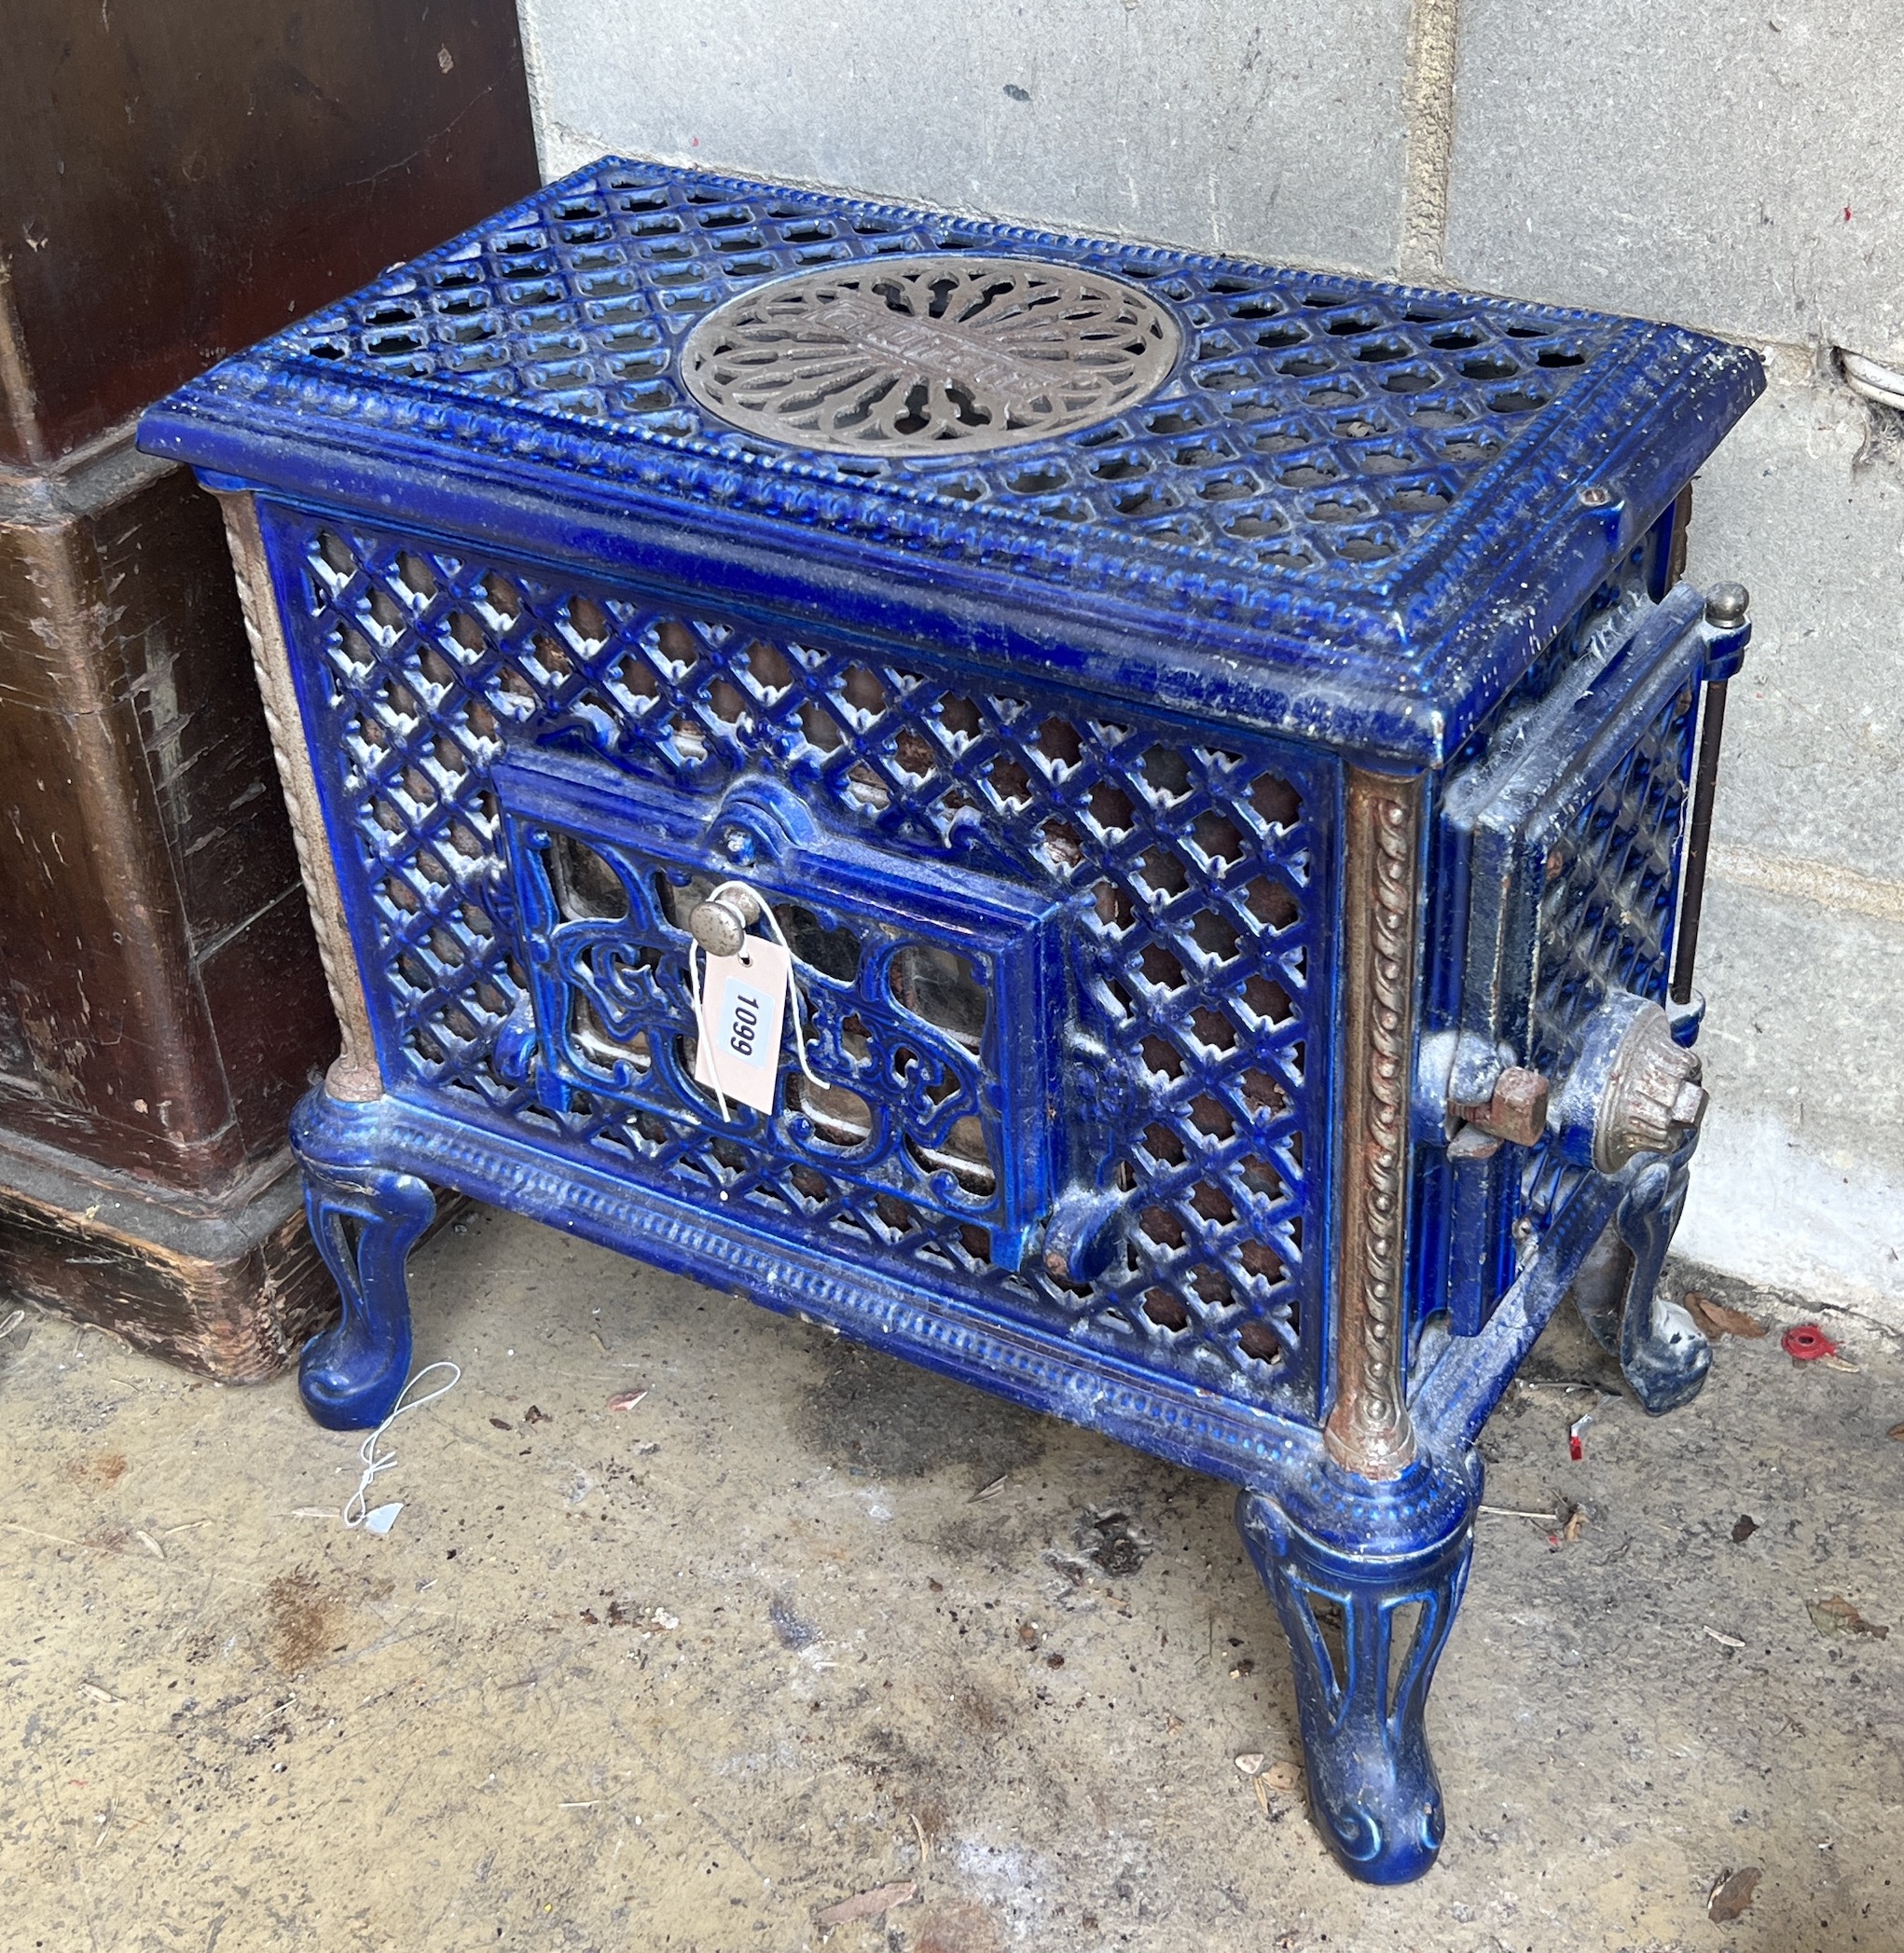 An early 20th century French Chauffette blue enamelled conservatory heater, width 54cm, depth 33cm, height 51cm